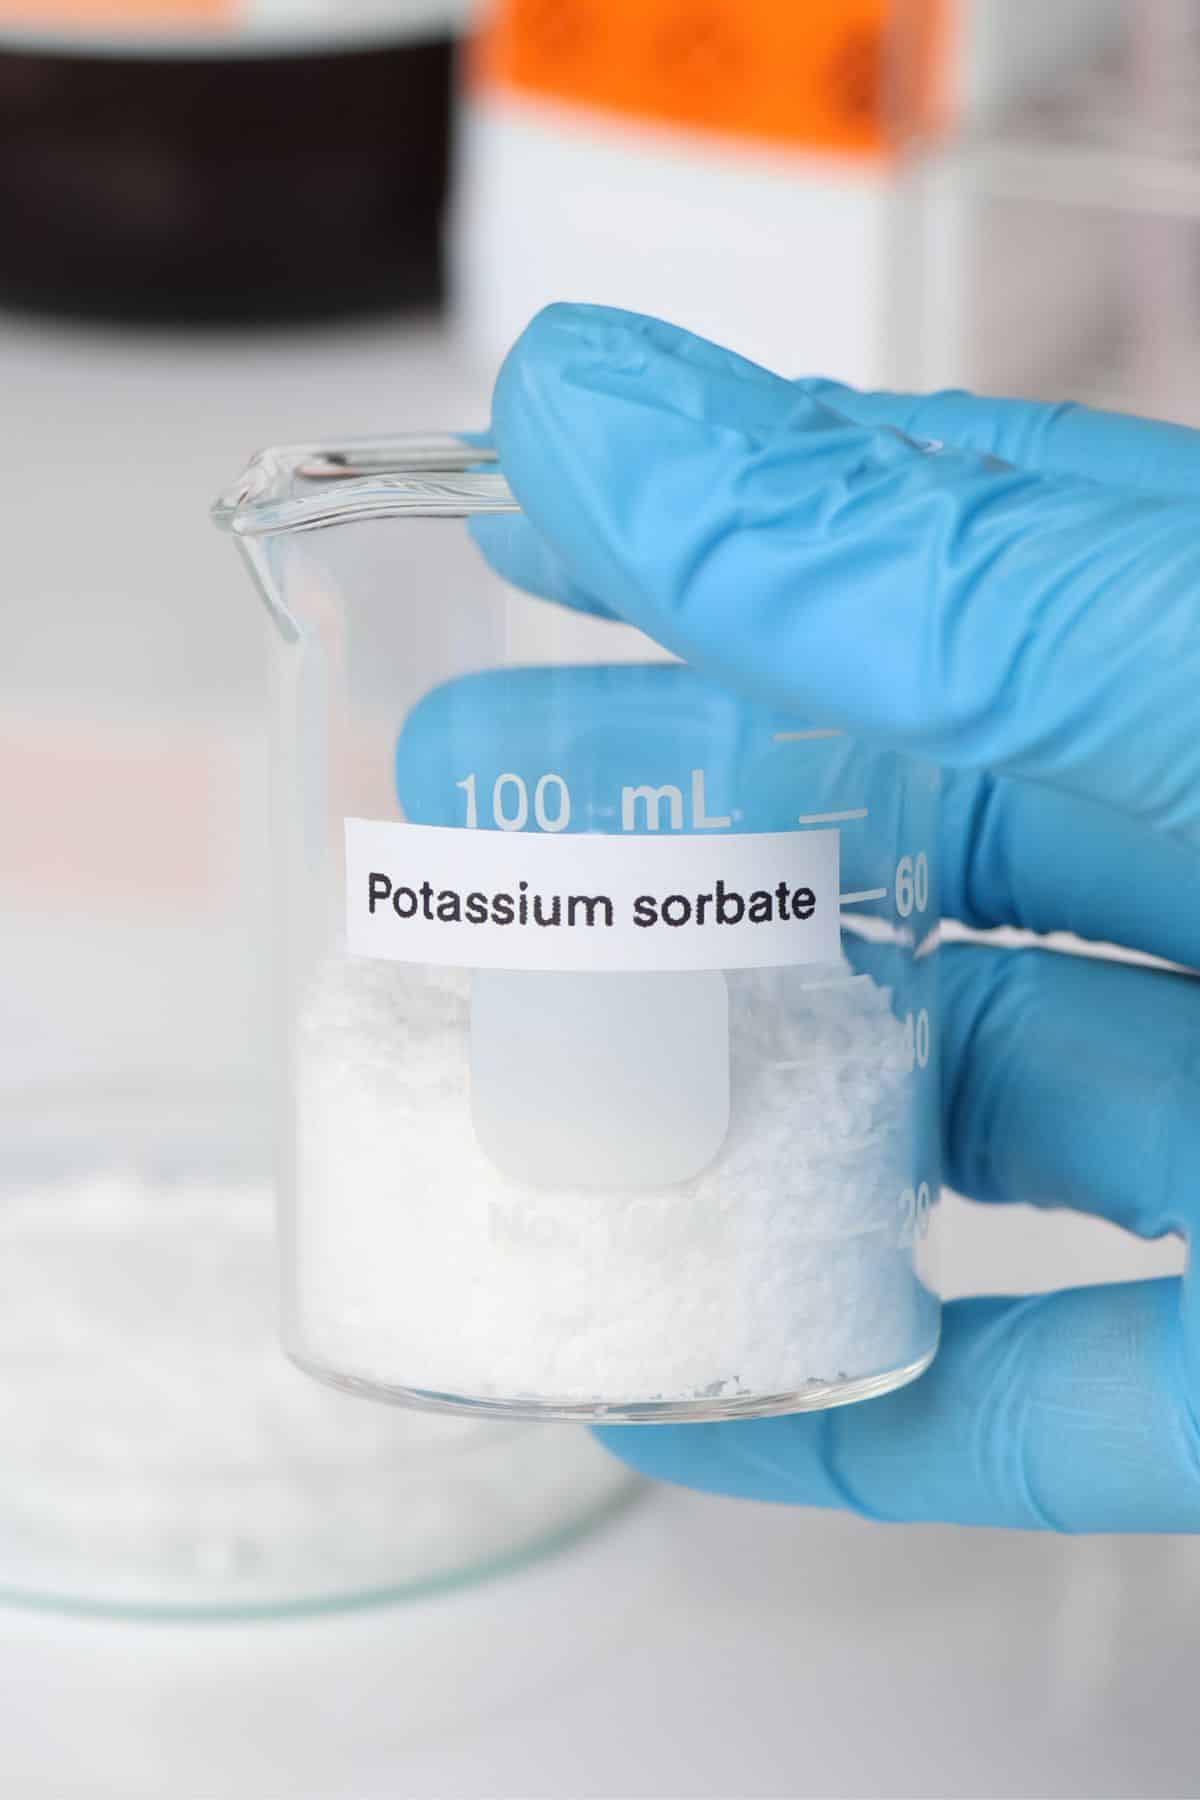 a person wearing gloves while holding a beaker of potassium sorbate.